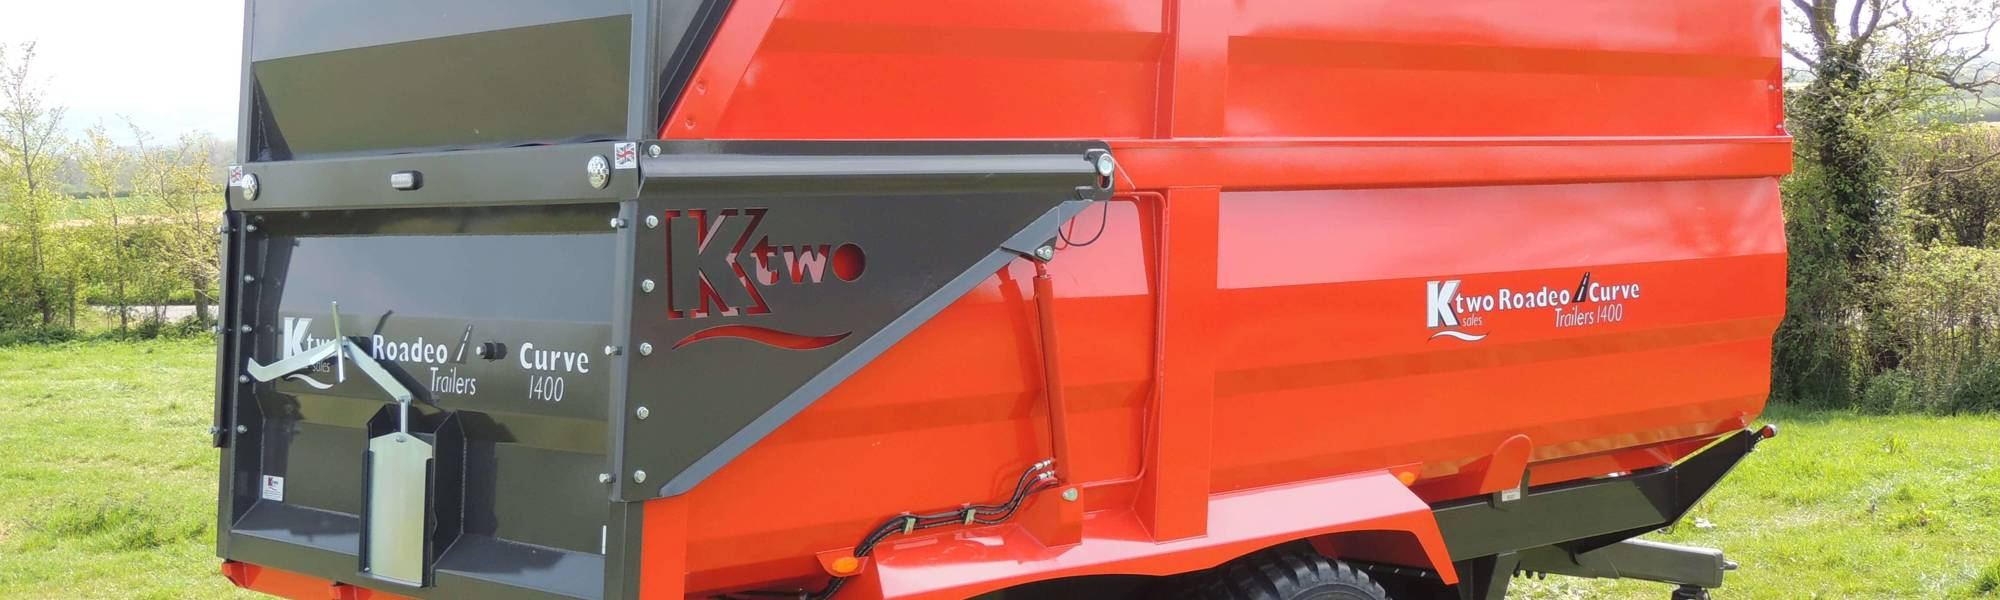 Curve Trailers - ktwo